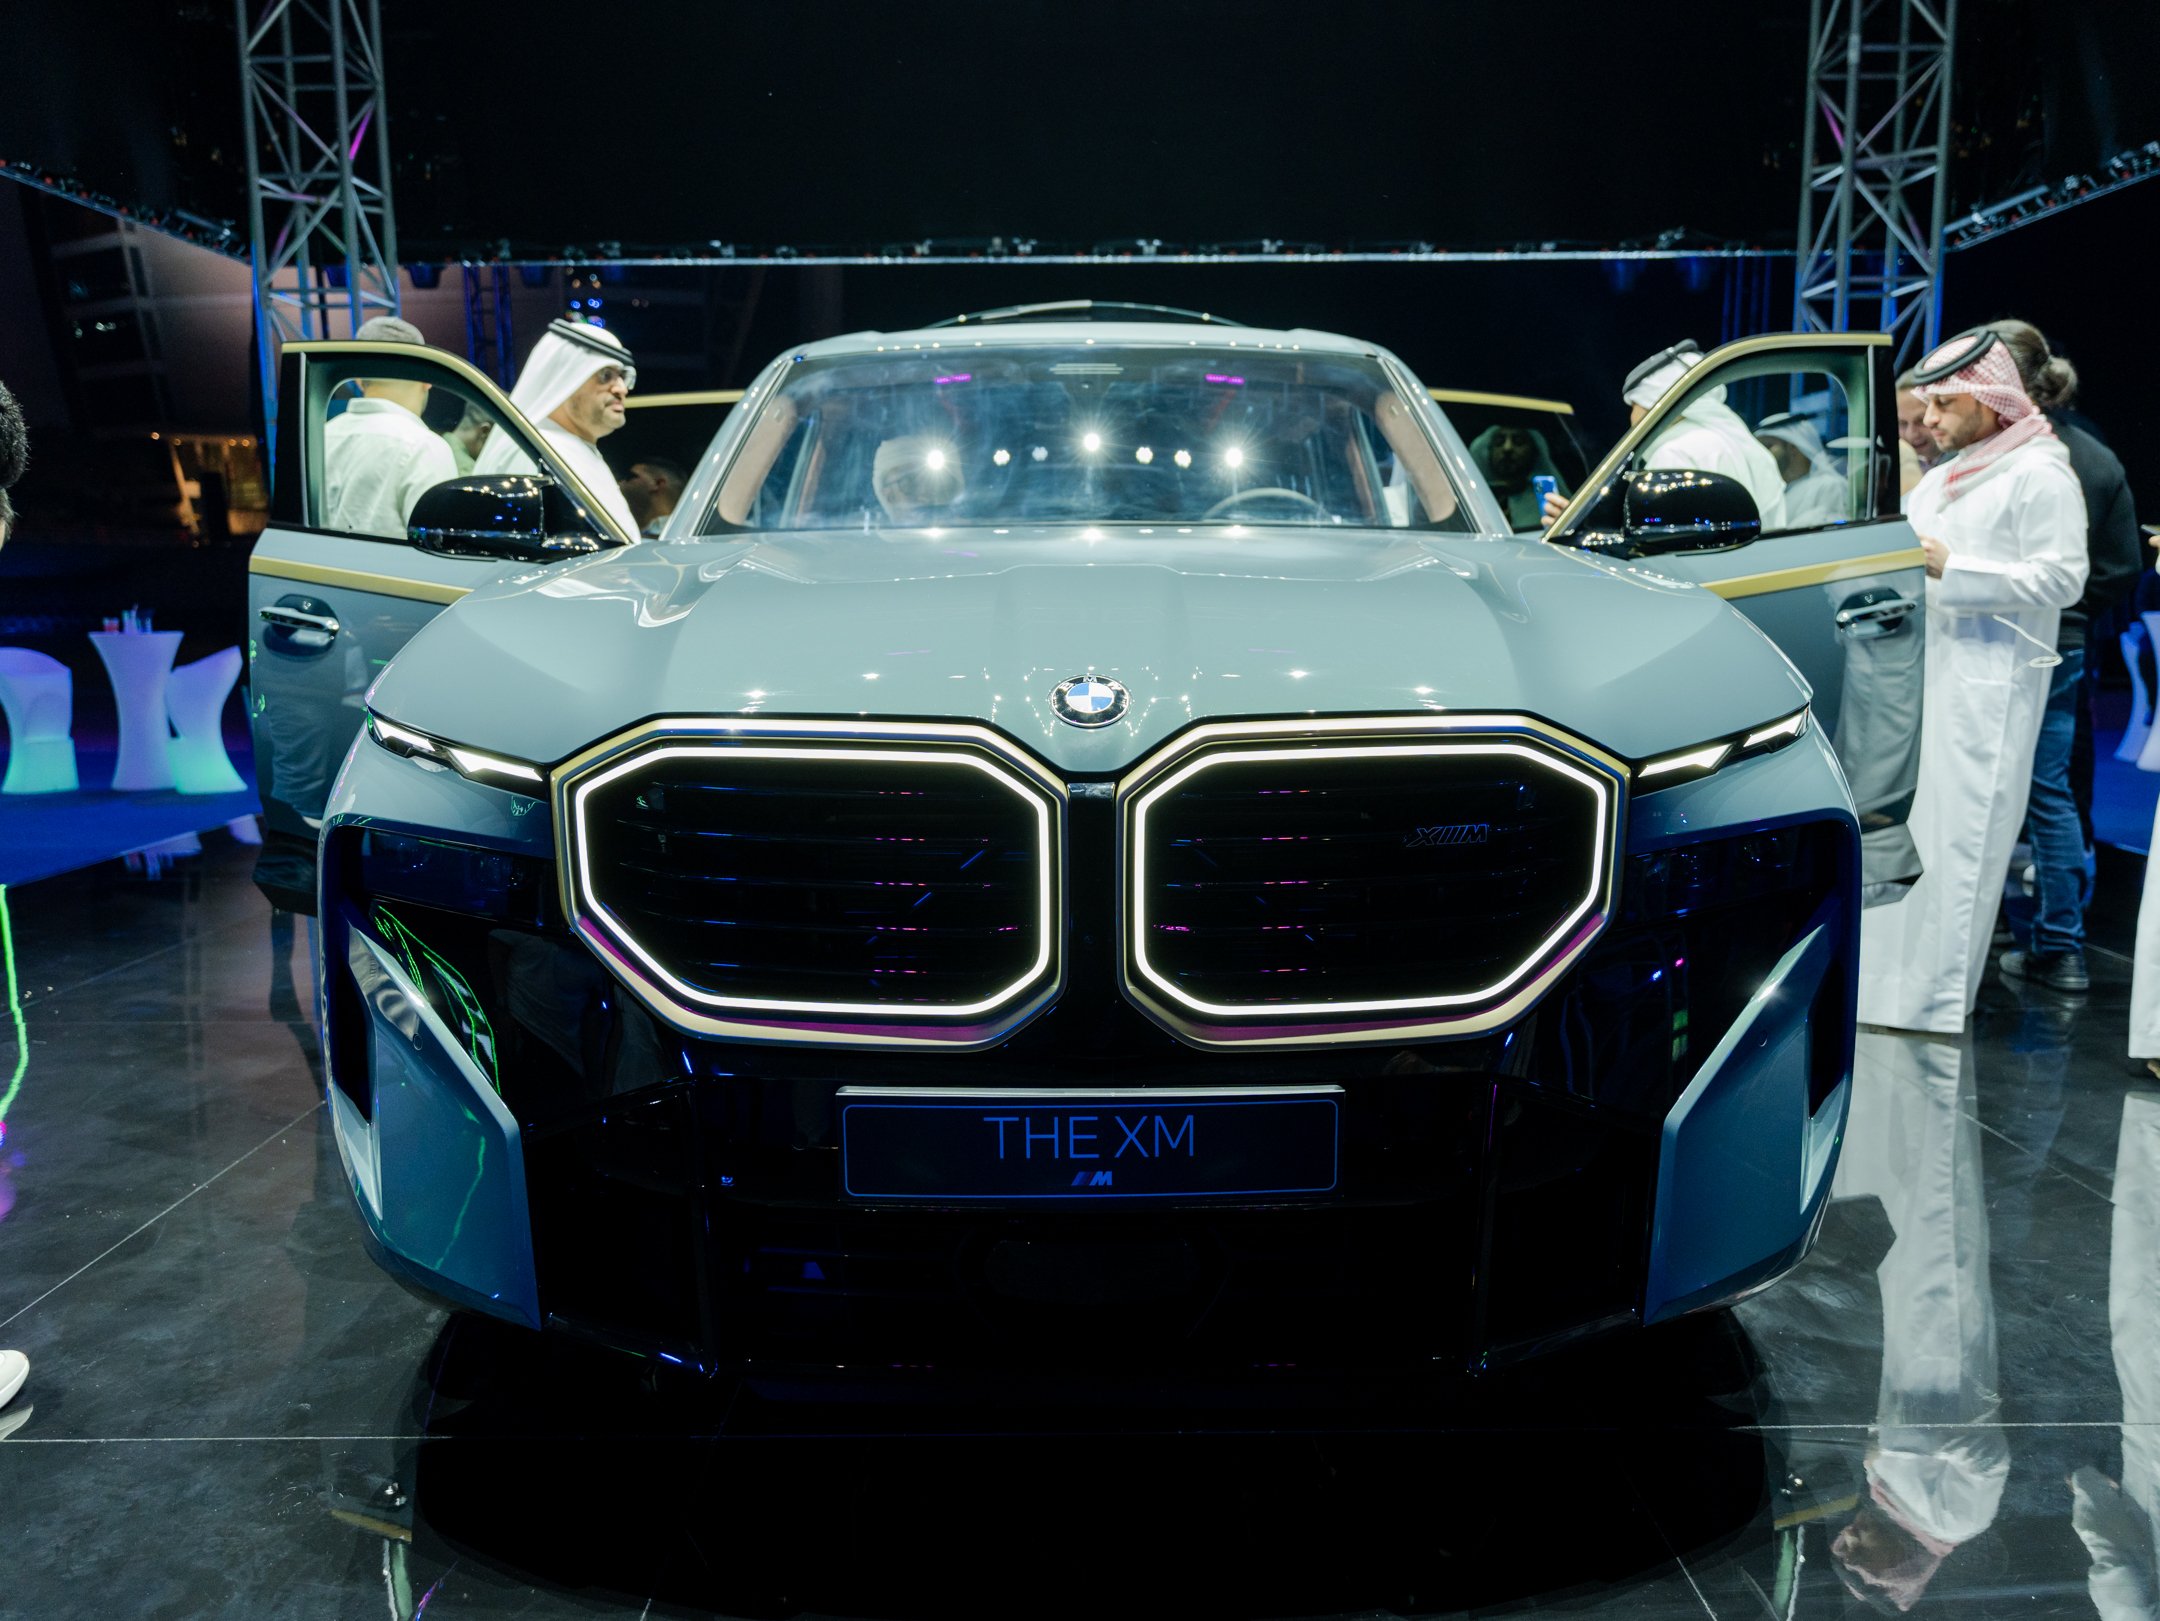 BMW launches the BMW XM for the first time ever in the Middle East Region